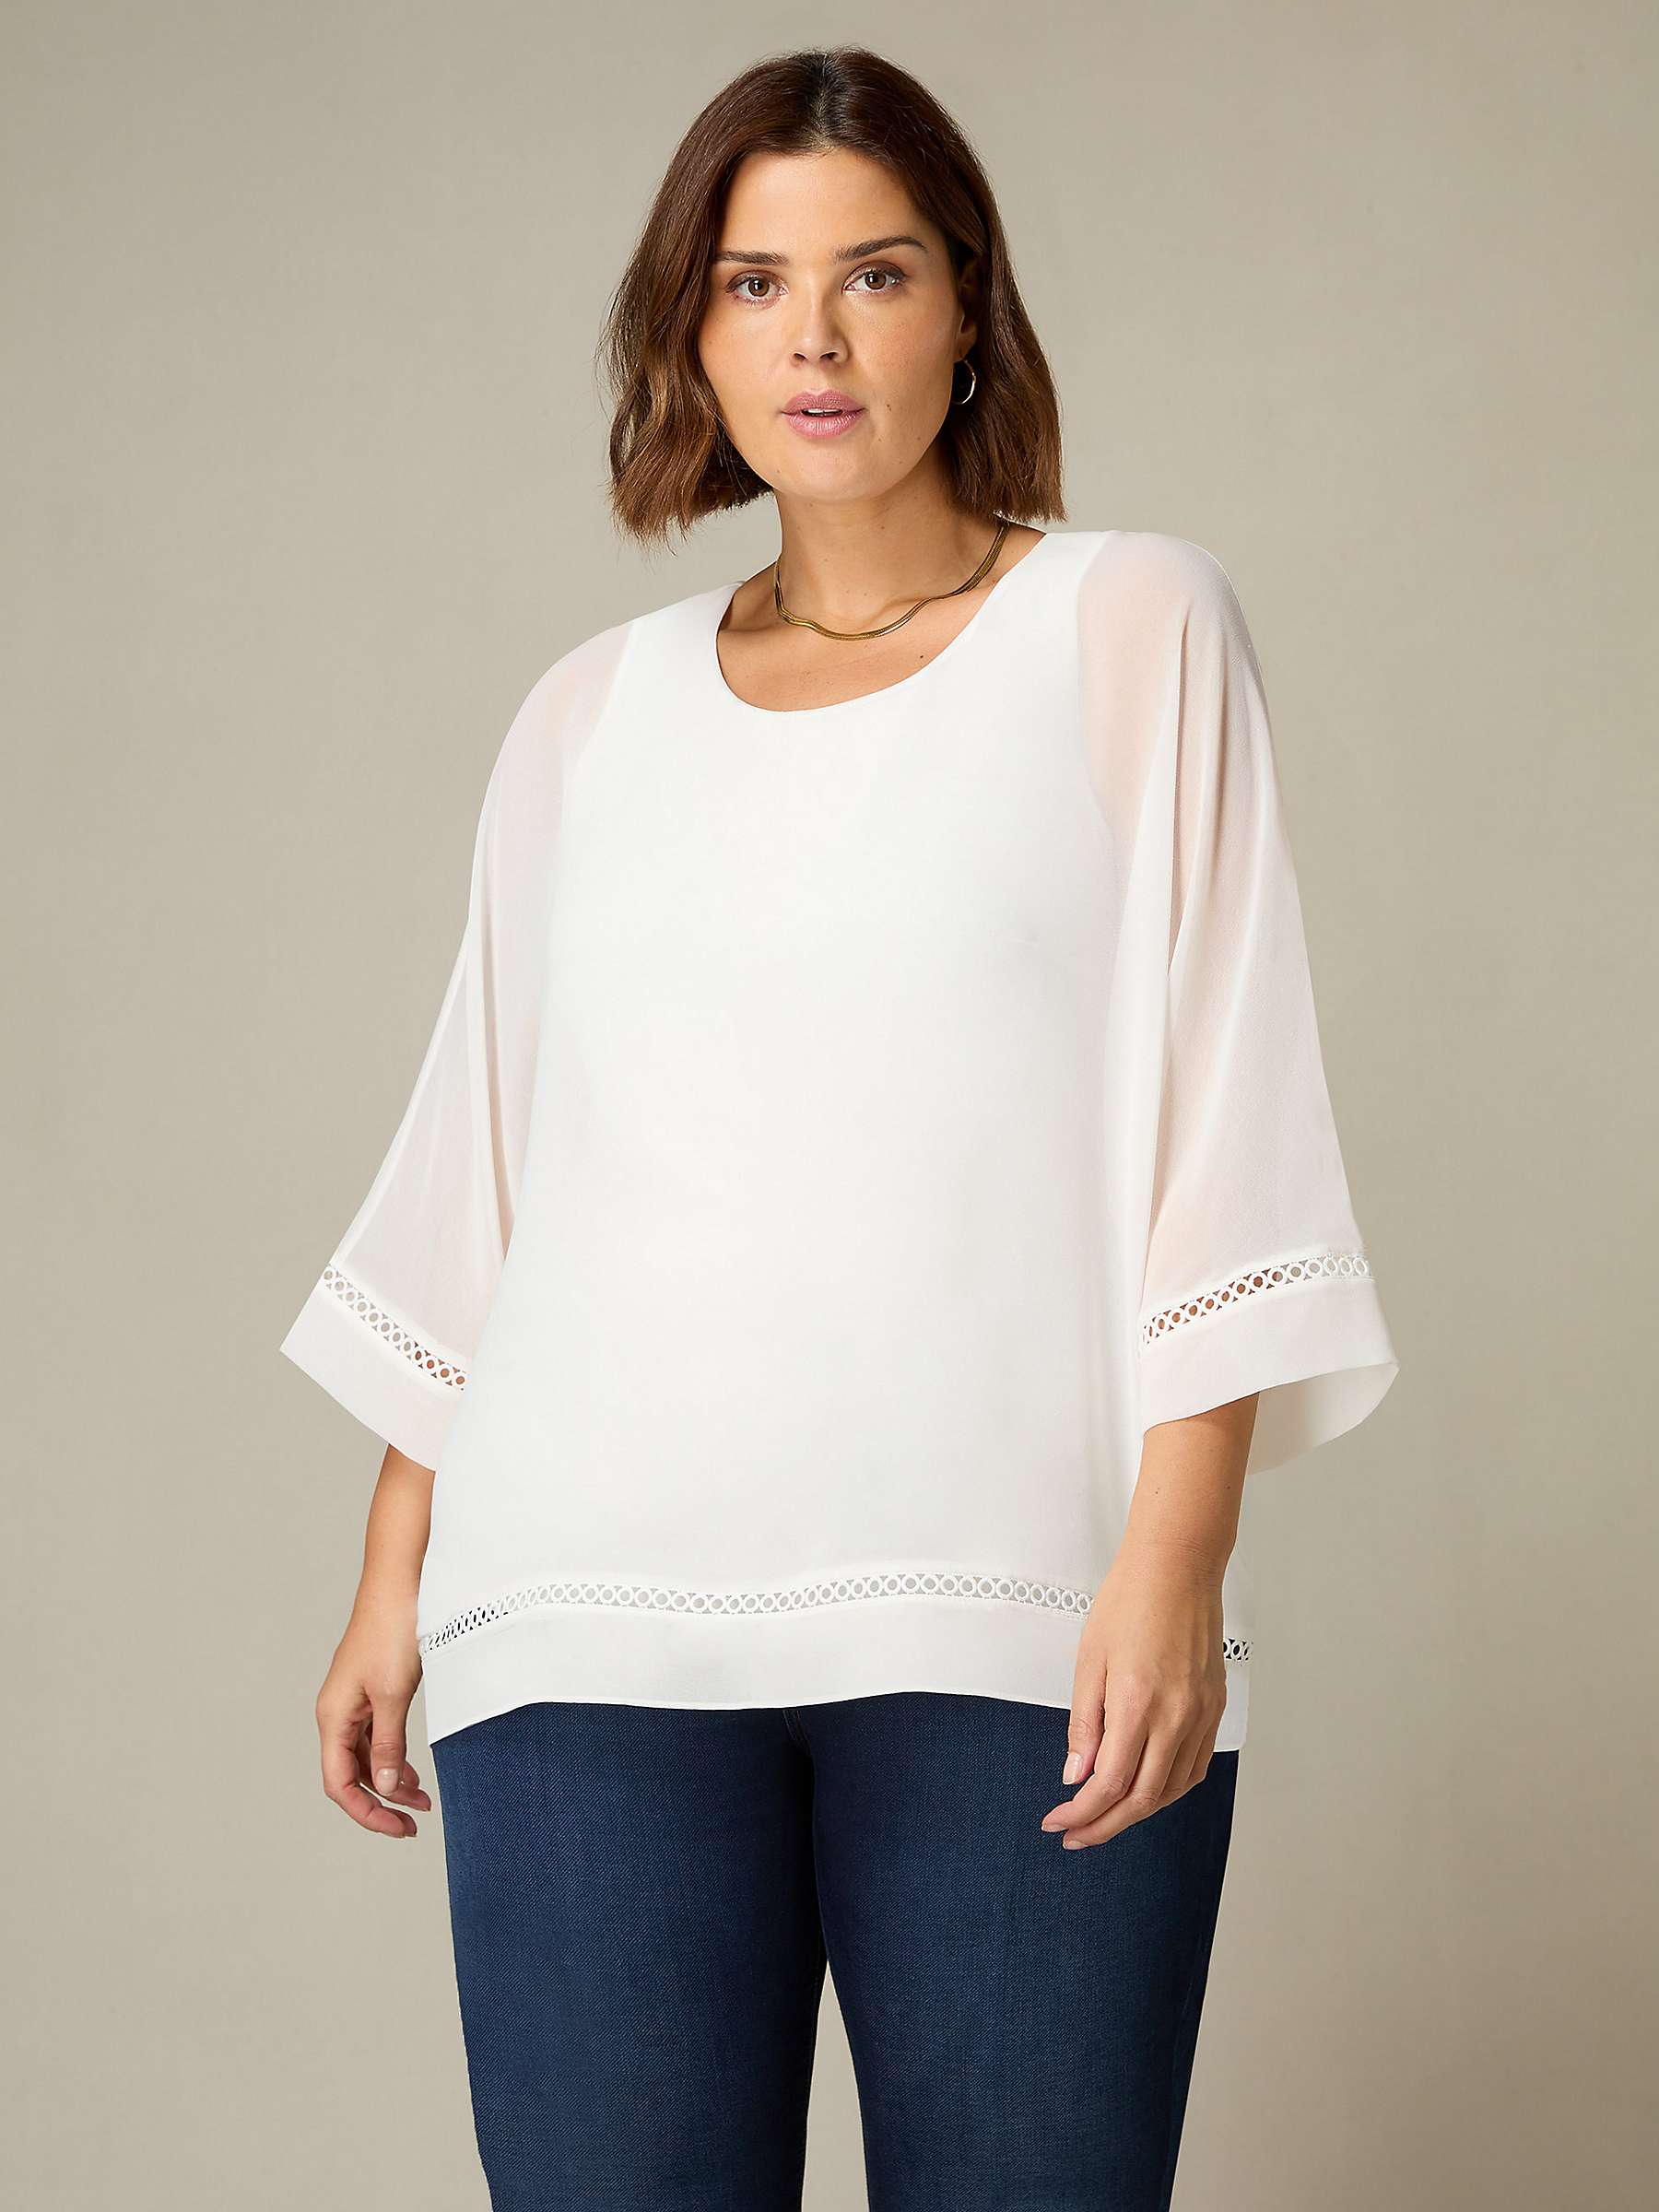 Buy Live Unlimited Curve Chiffon Trim Overlay Top, Ivory Online at johnlewis.com